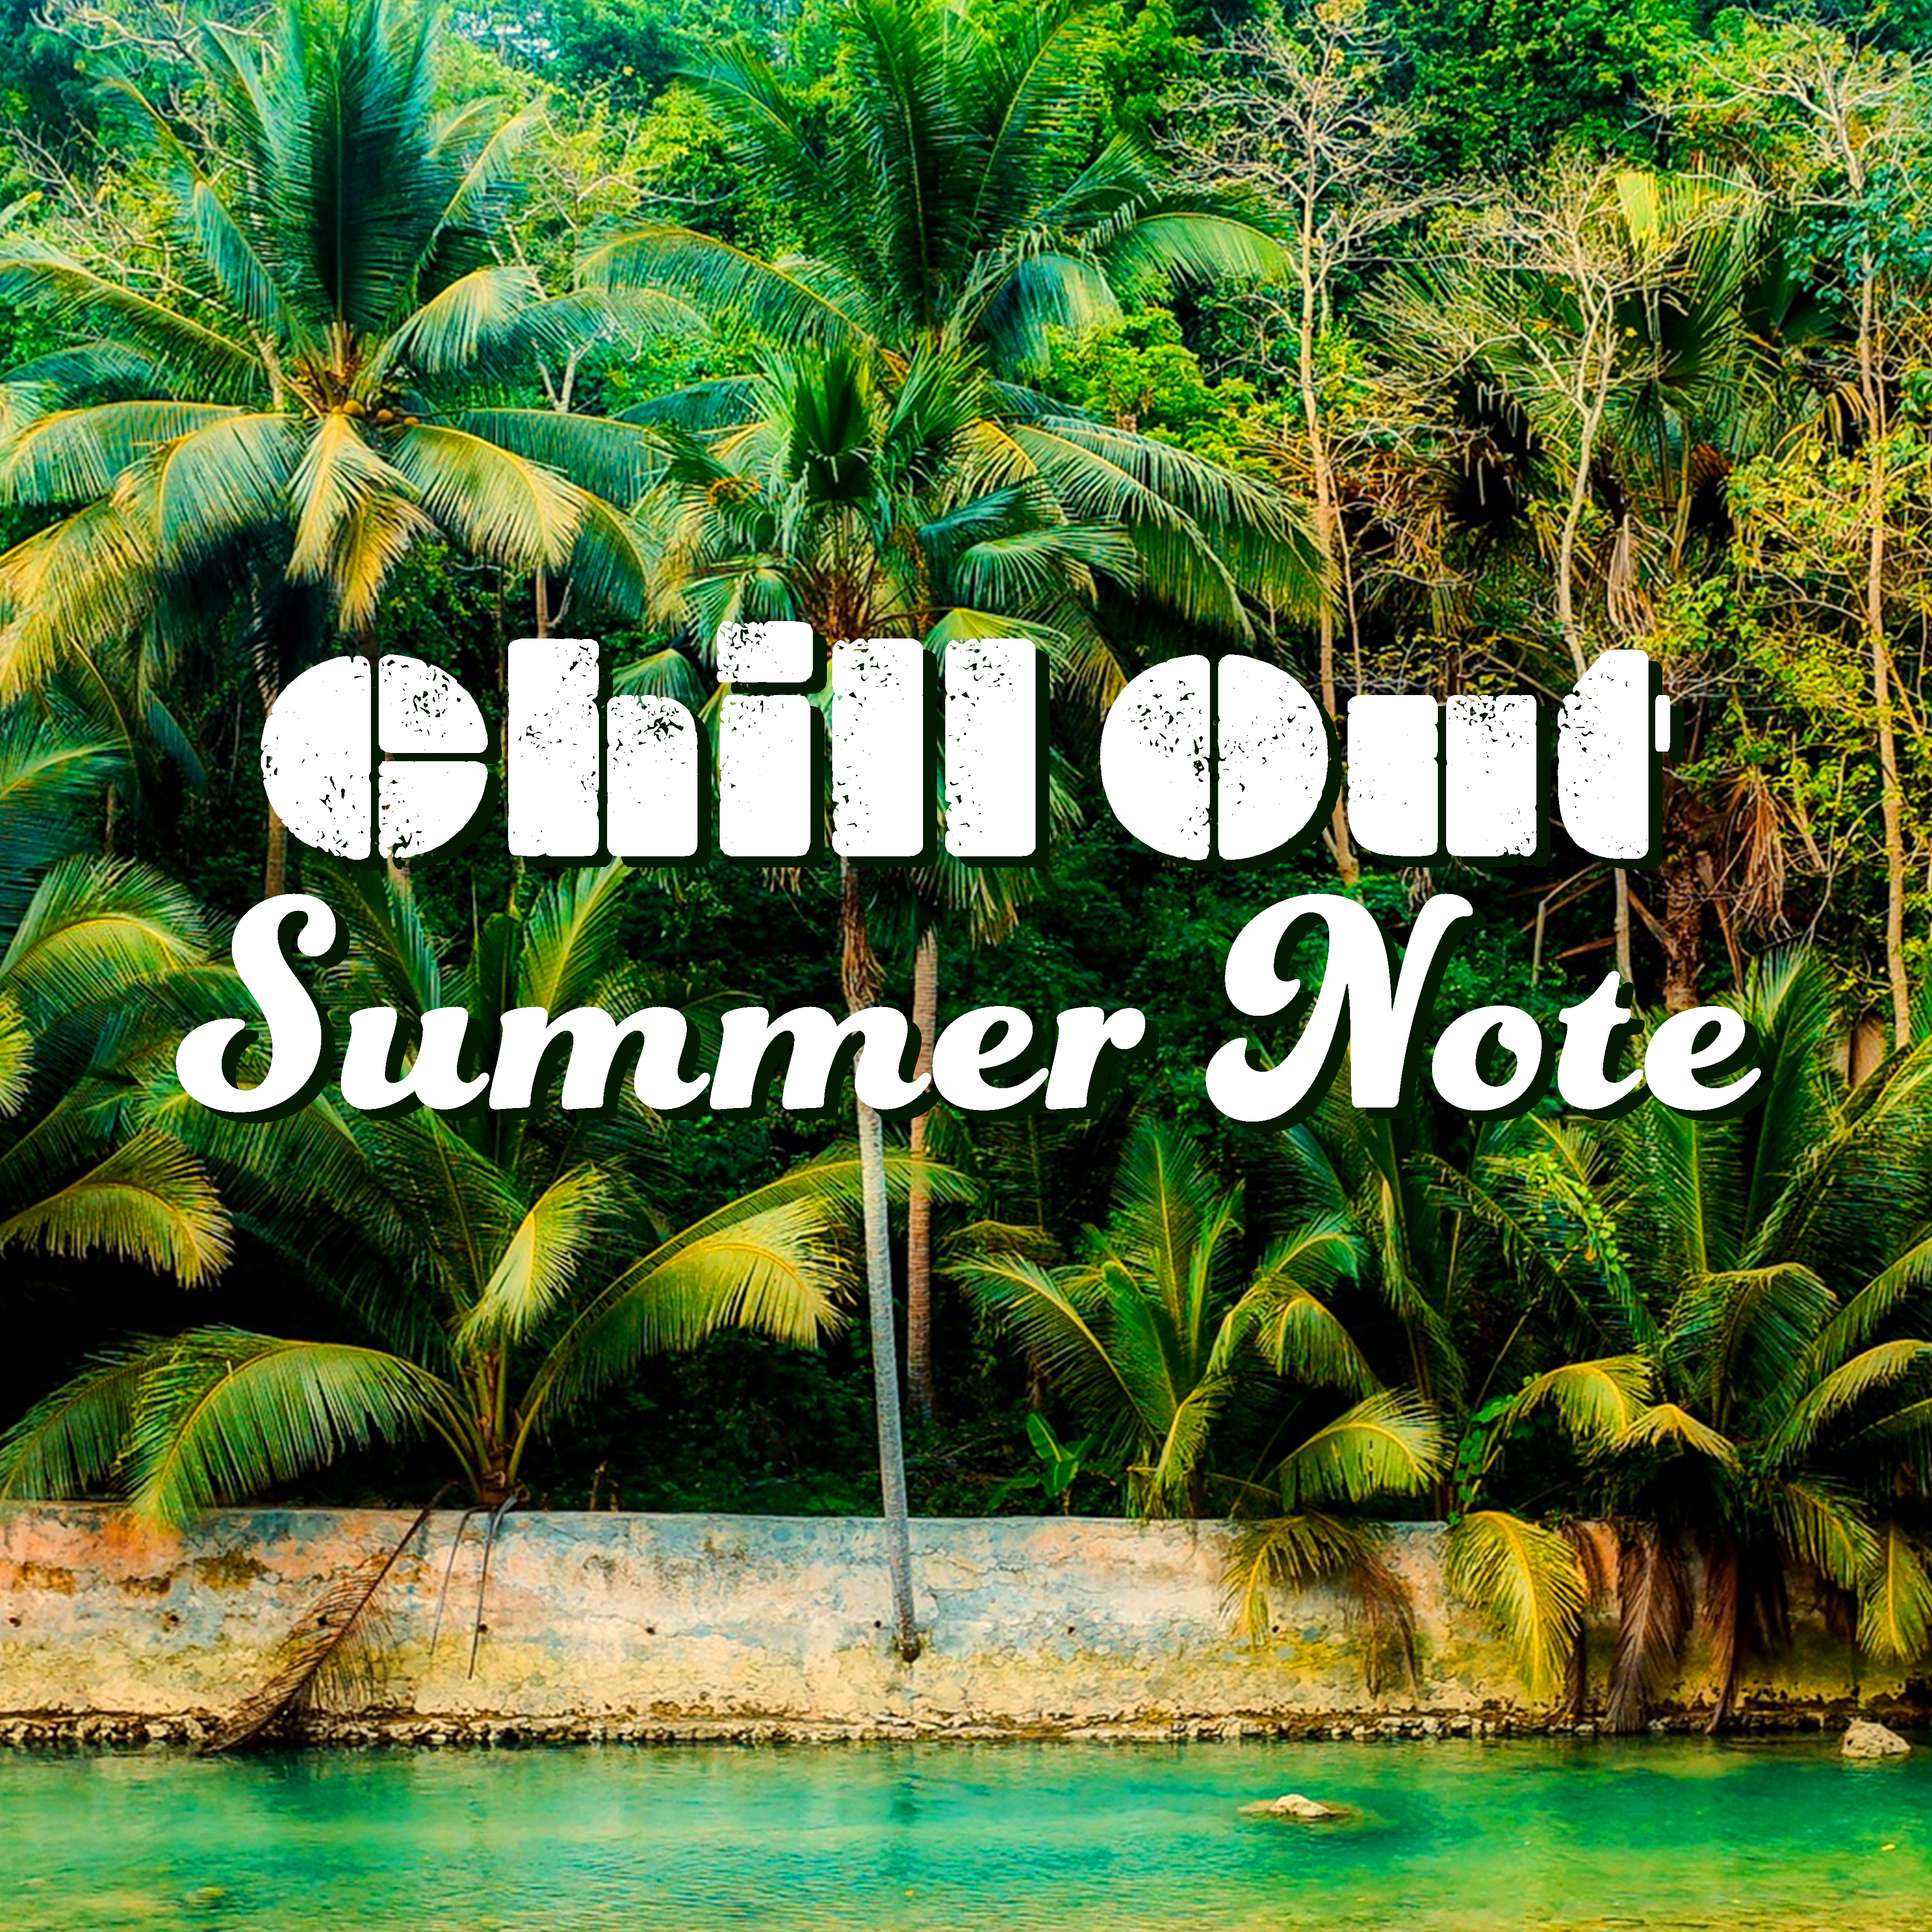 Chill Out Summer Note – Easy Listening, Chill Out Beats, Stress Relief, Summer Calm Vibes